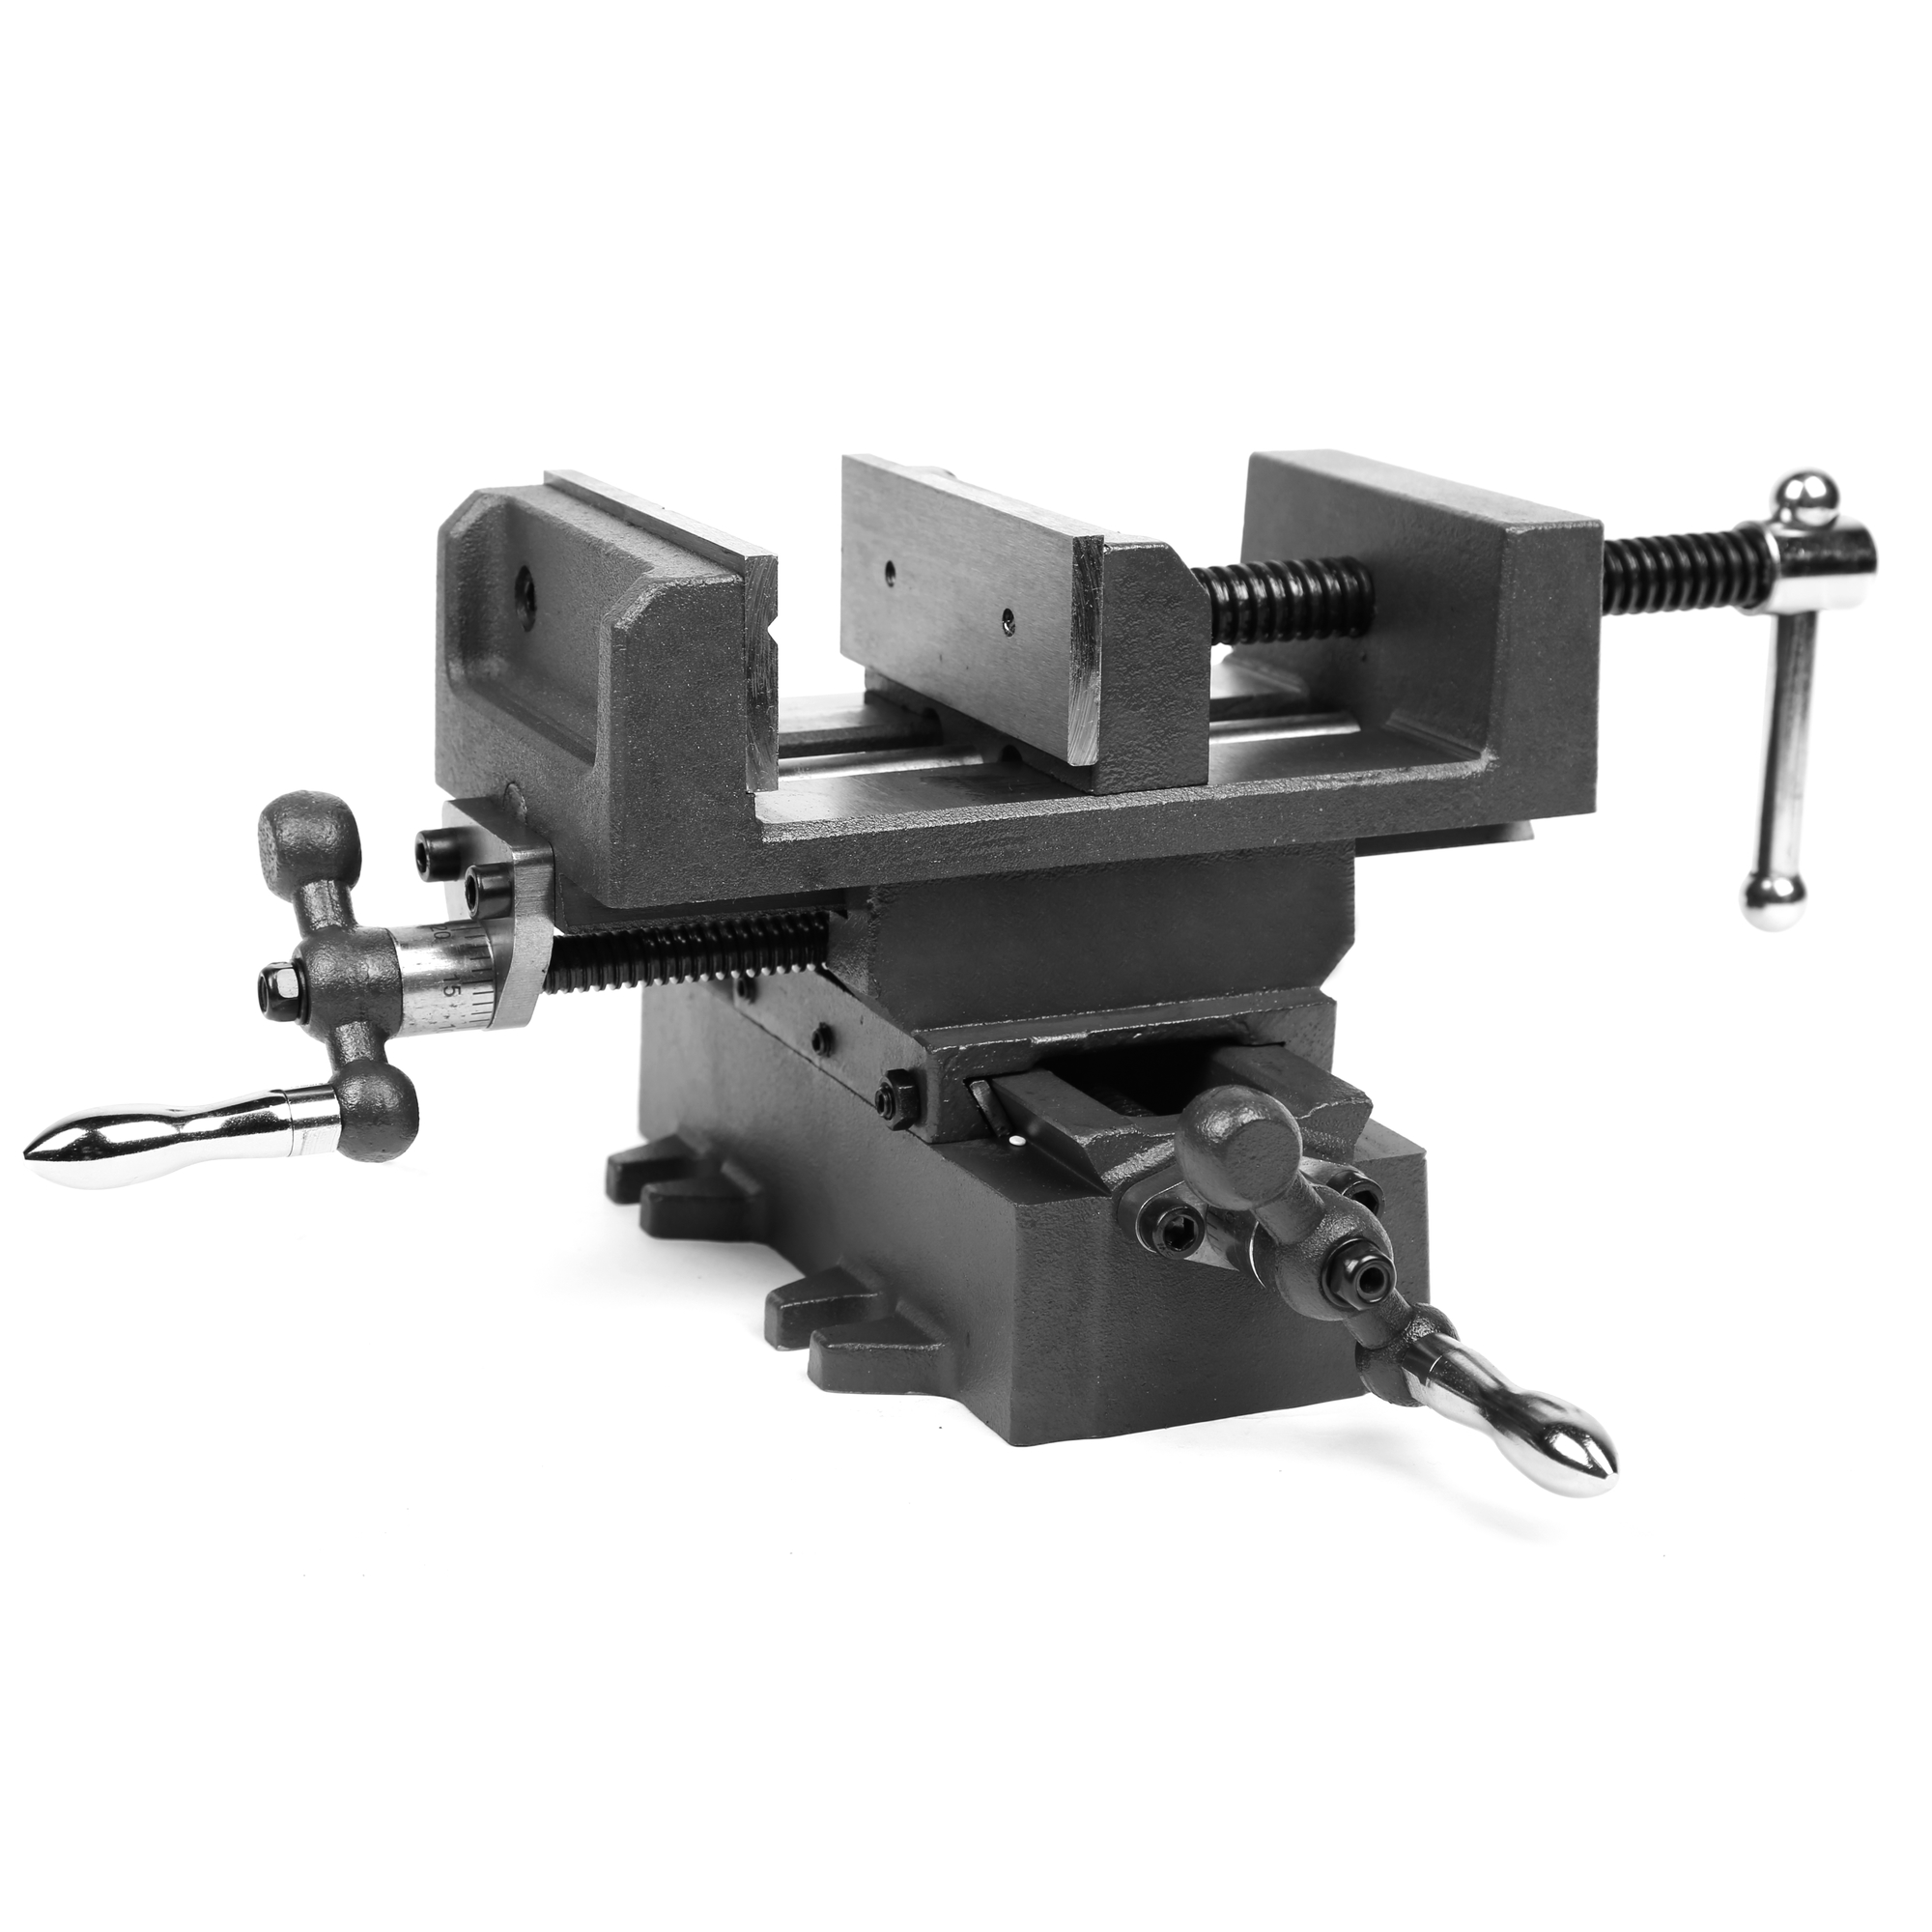 WEN, 4.25Inch Cross Slide Benchtop and Drill Press Vise, Jaw Width 4.125 in, Jaw Capacity 4.5 in, Material Cast Iron, Model CV414